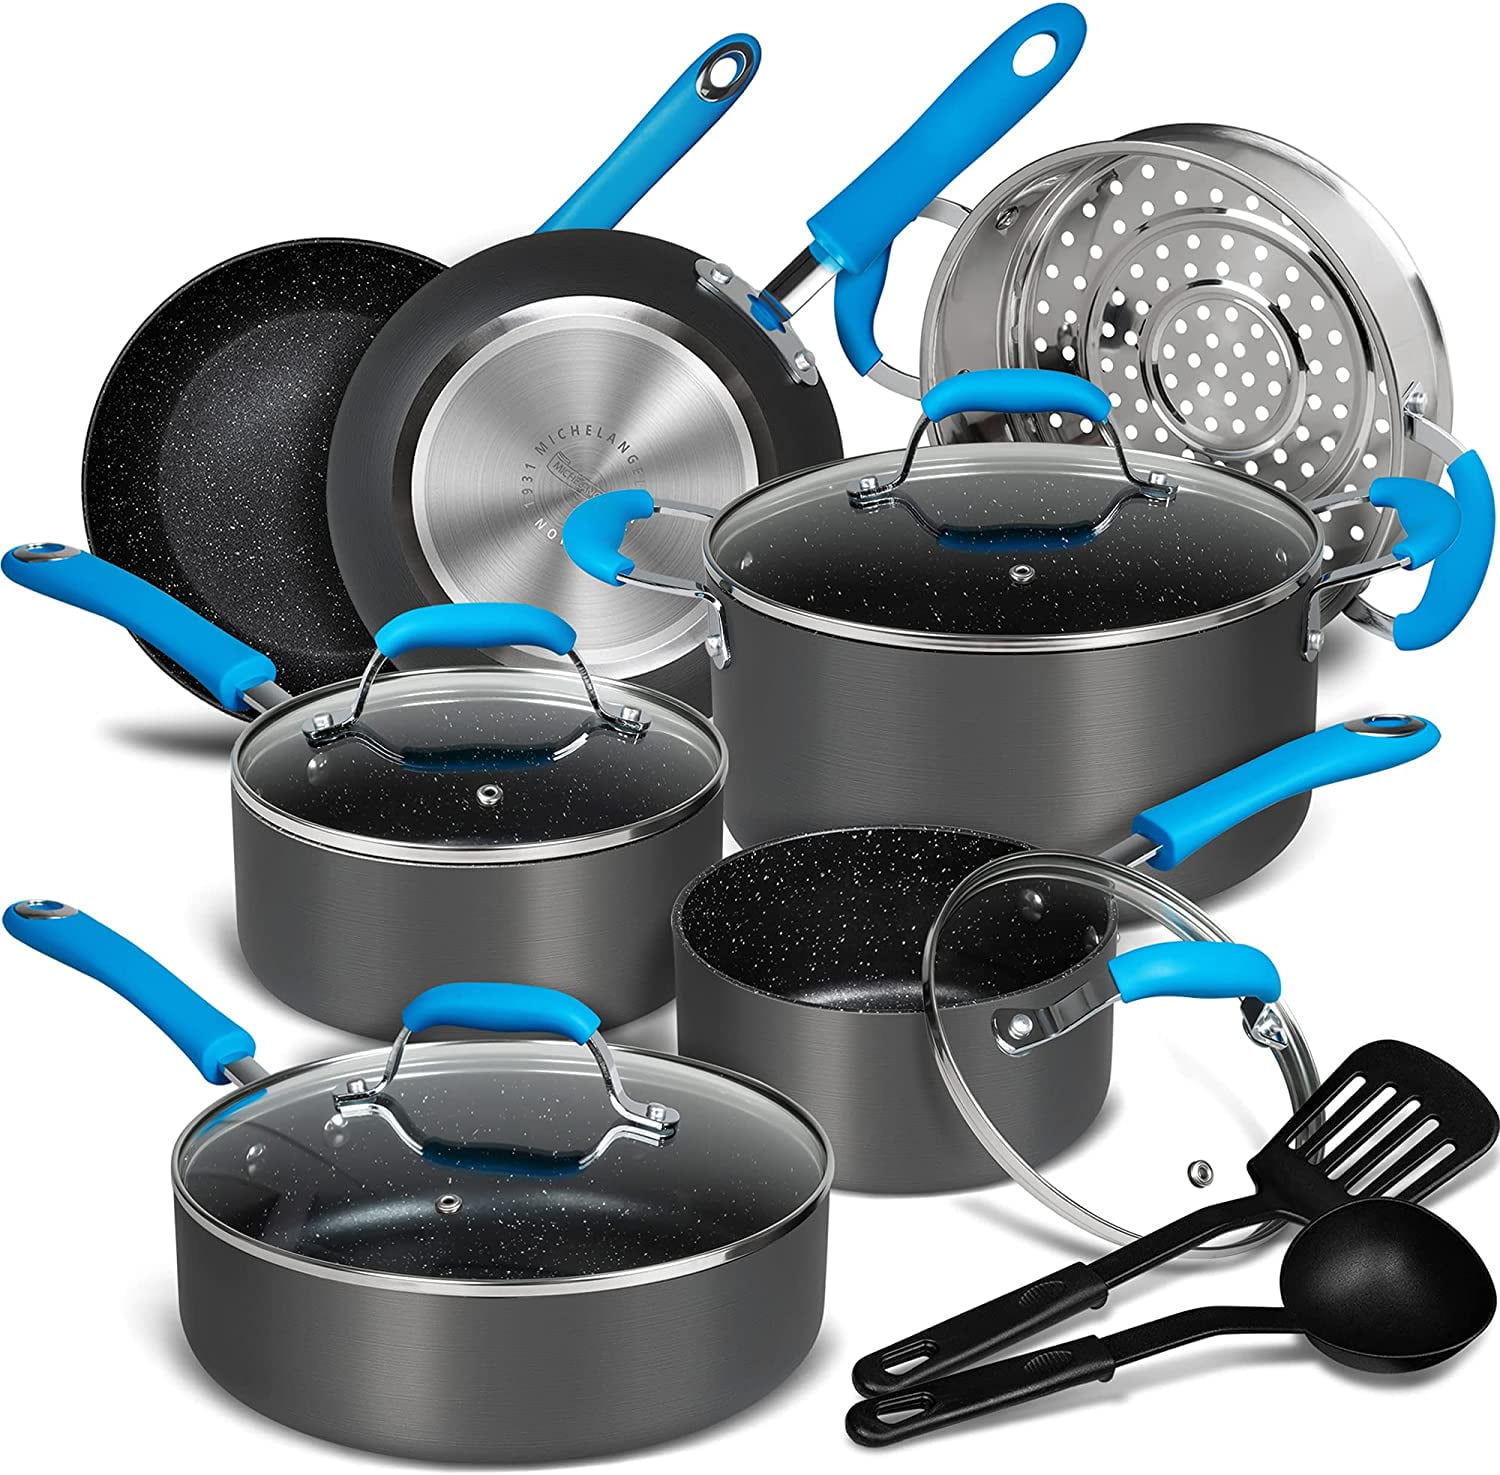  MICHELANGELO Pots and Pans Set 15 Piece with with Non